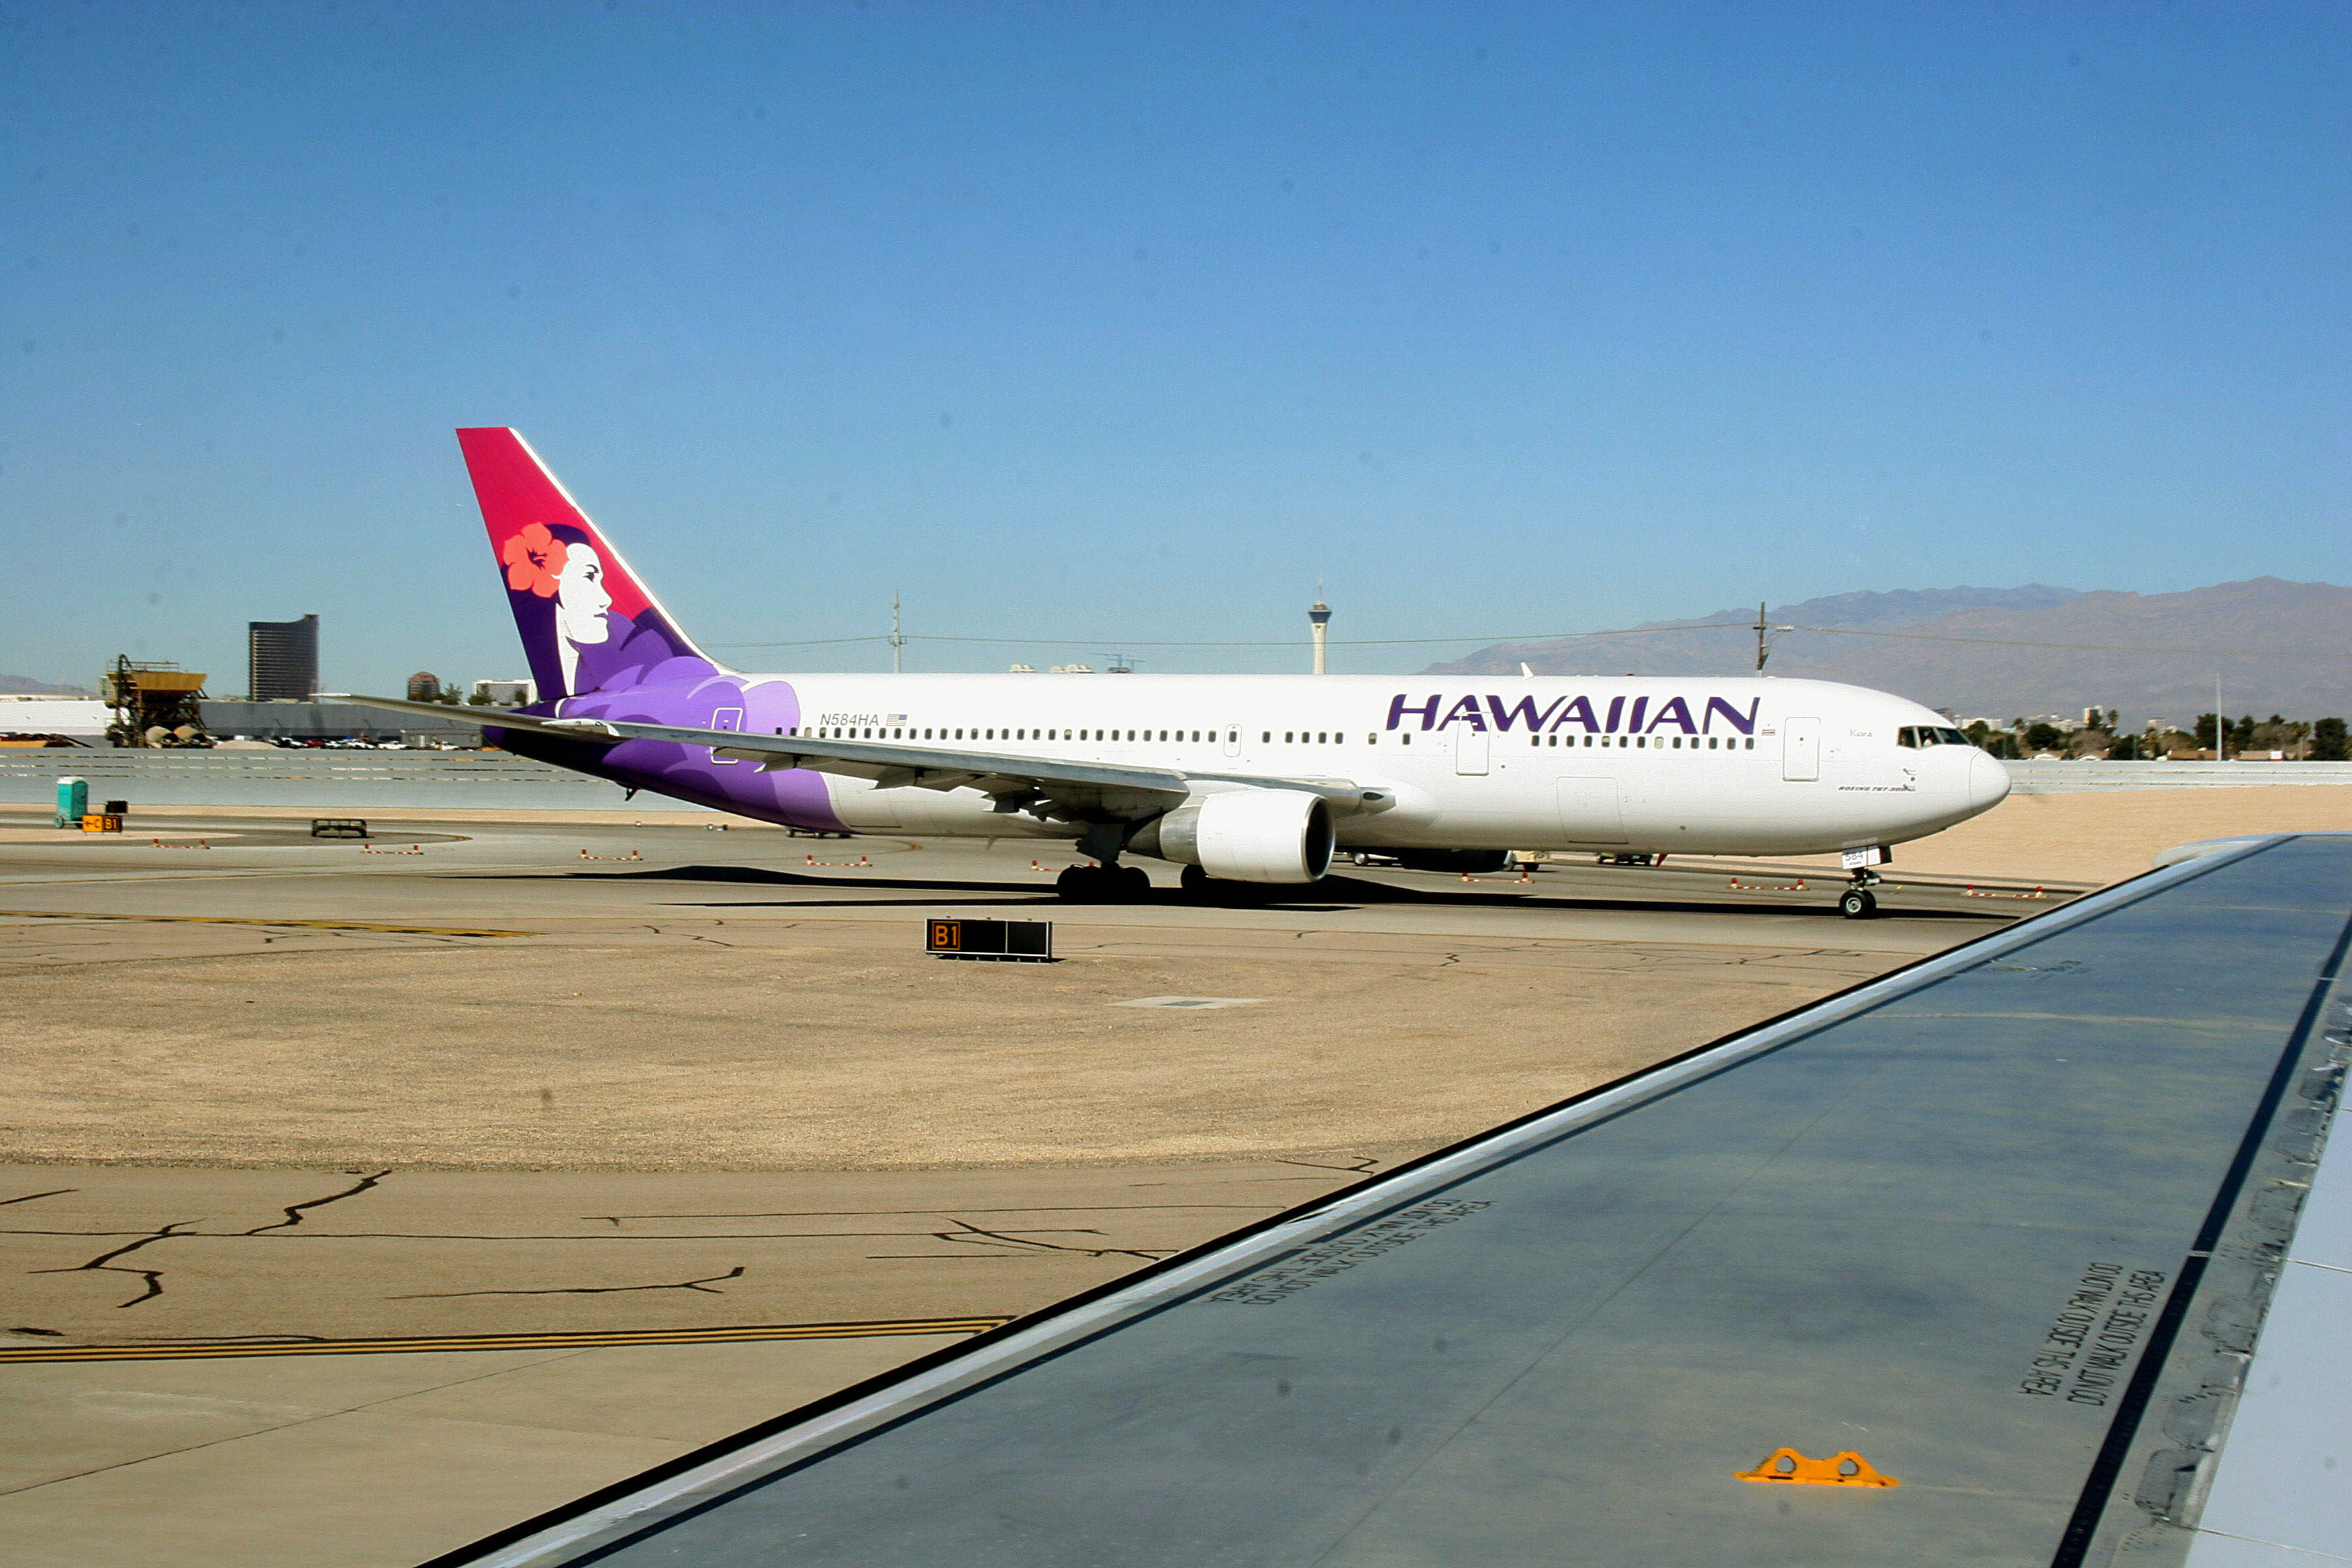 A Hawaiian Airlines jet taxies out to the runway at Phoenix Sky Harbor International Airport in Phoenix, Arizona 14 February, 2006. AFP PHOTO/Karen BLEIER / AFP PHOTO / KAREN BLEIER